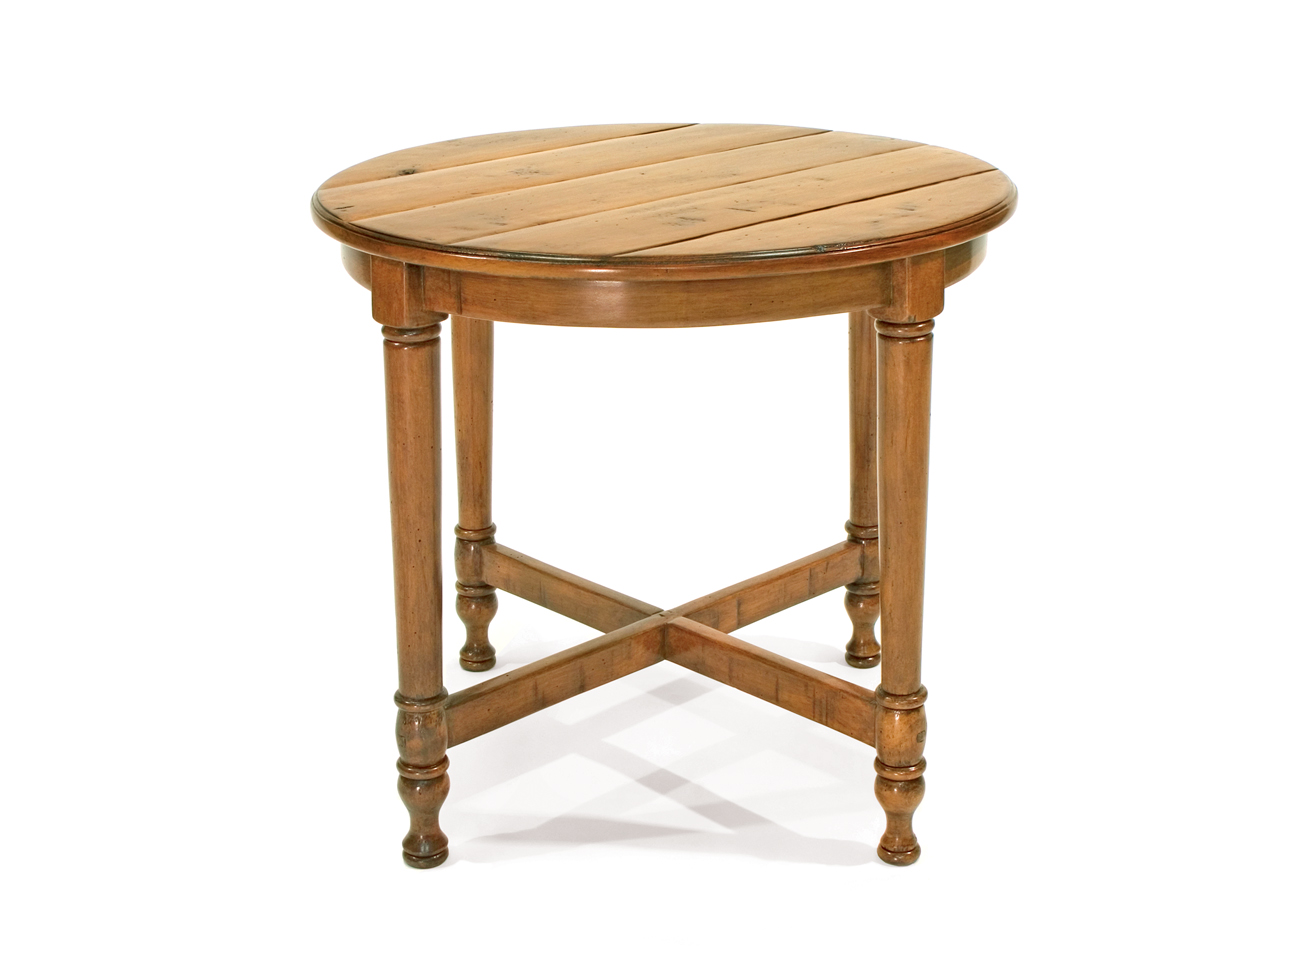 Robert-Seliger-Petite-Provencal-Table-above